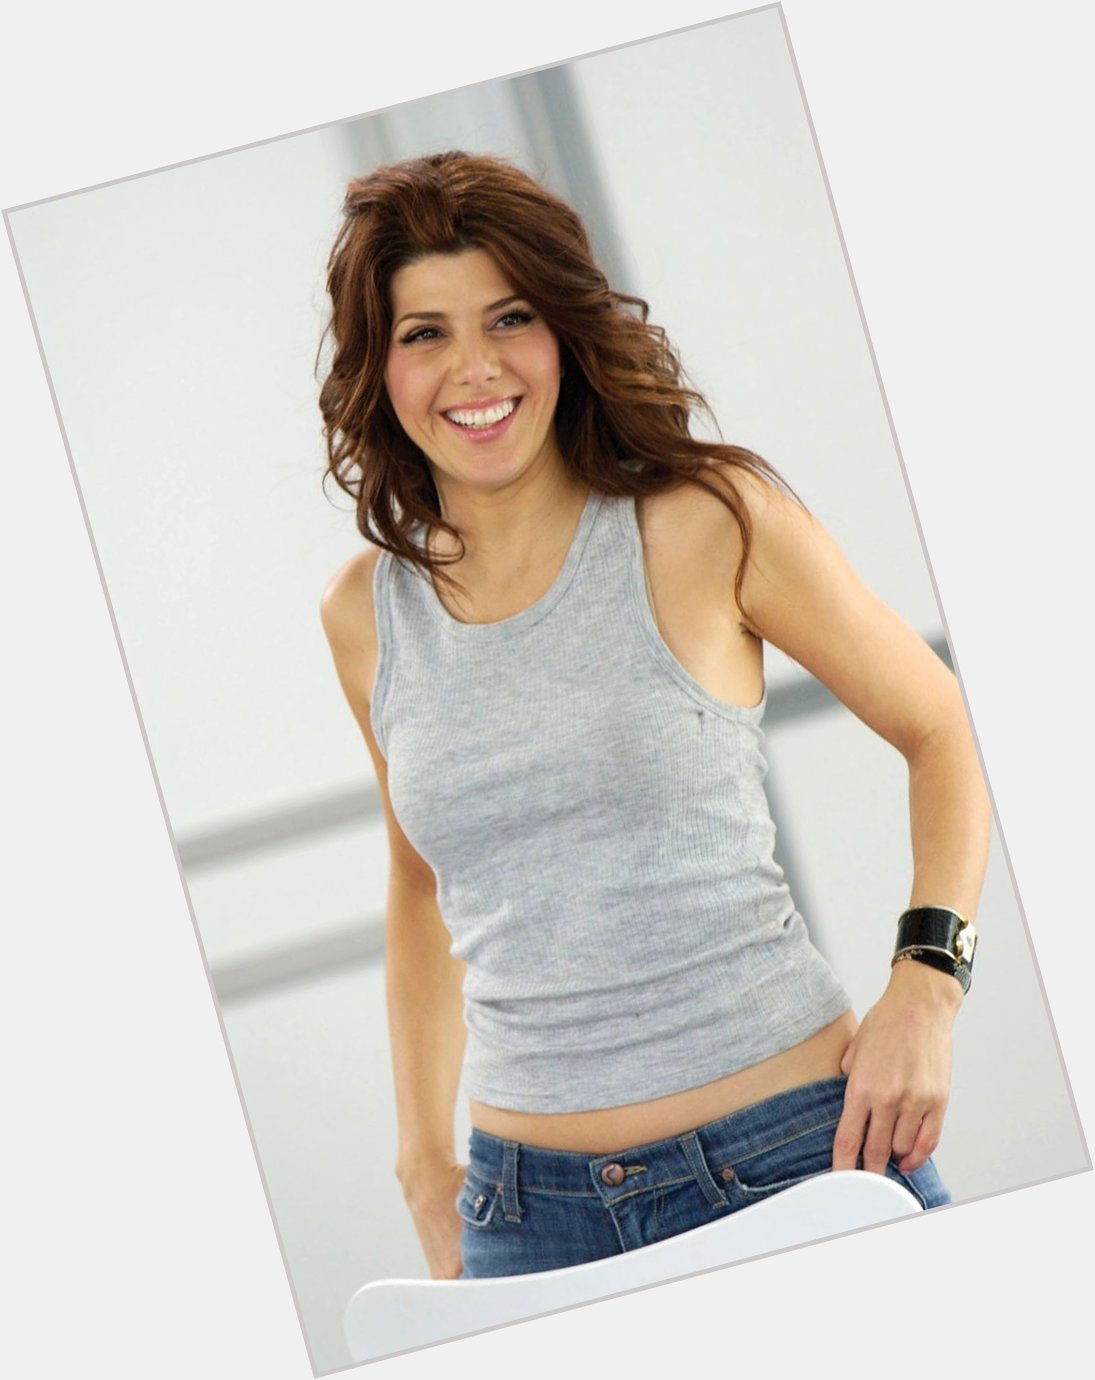 Happy 56th Birthday To Marisa Tomei! The Actress Who Voiced Craig The Farmer From Unikitty. 